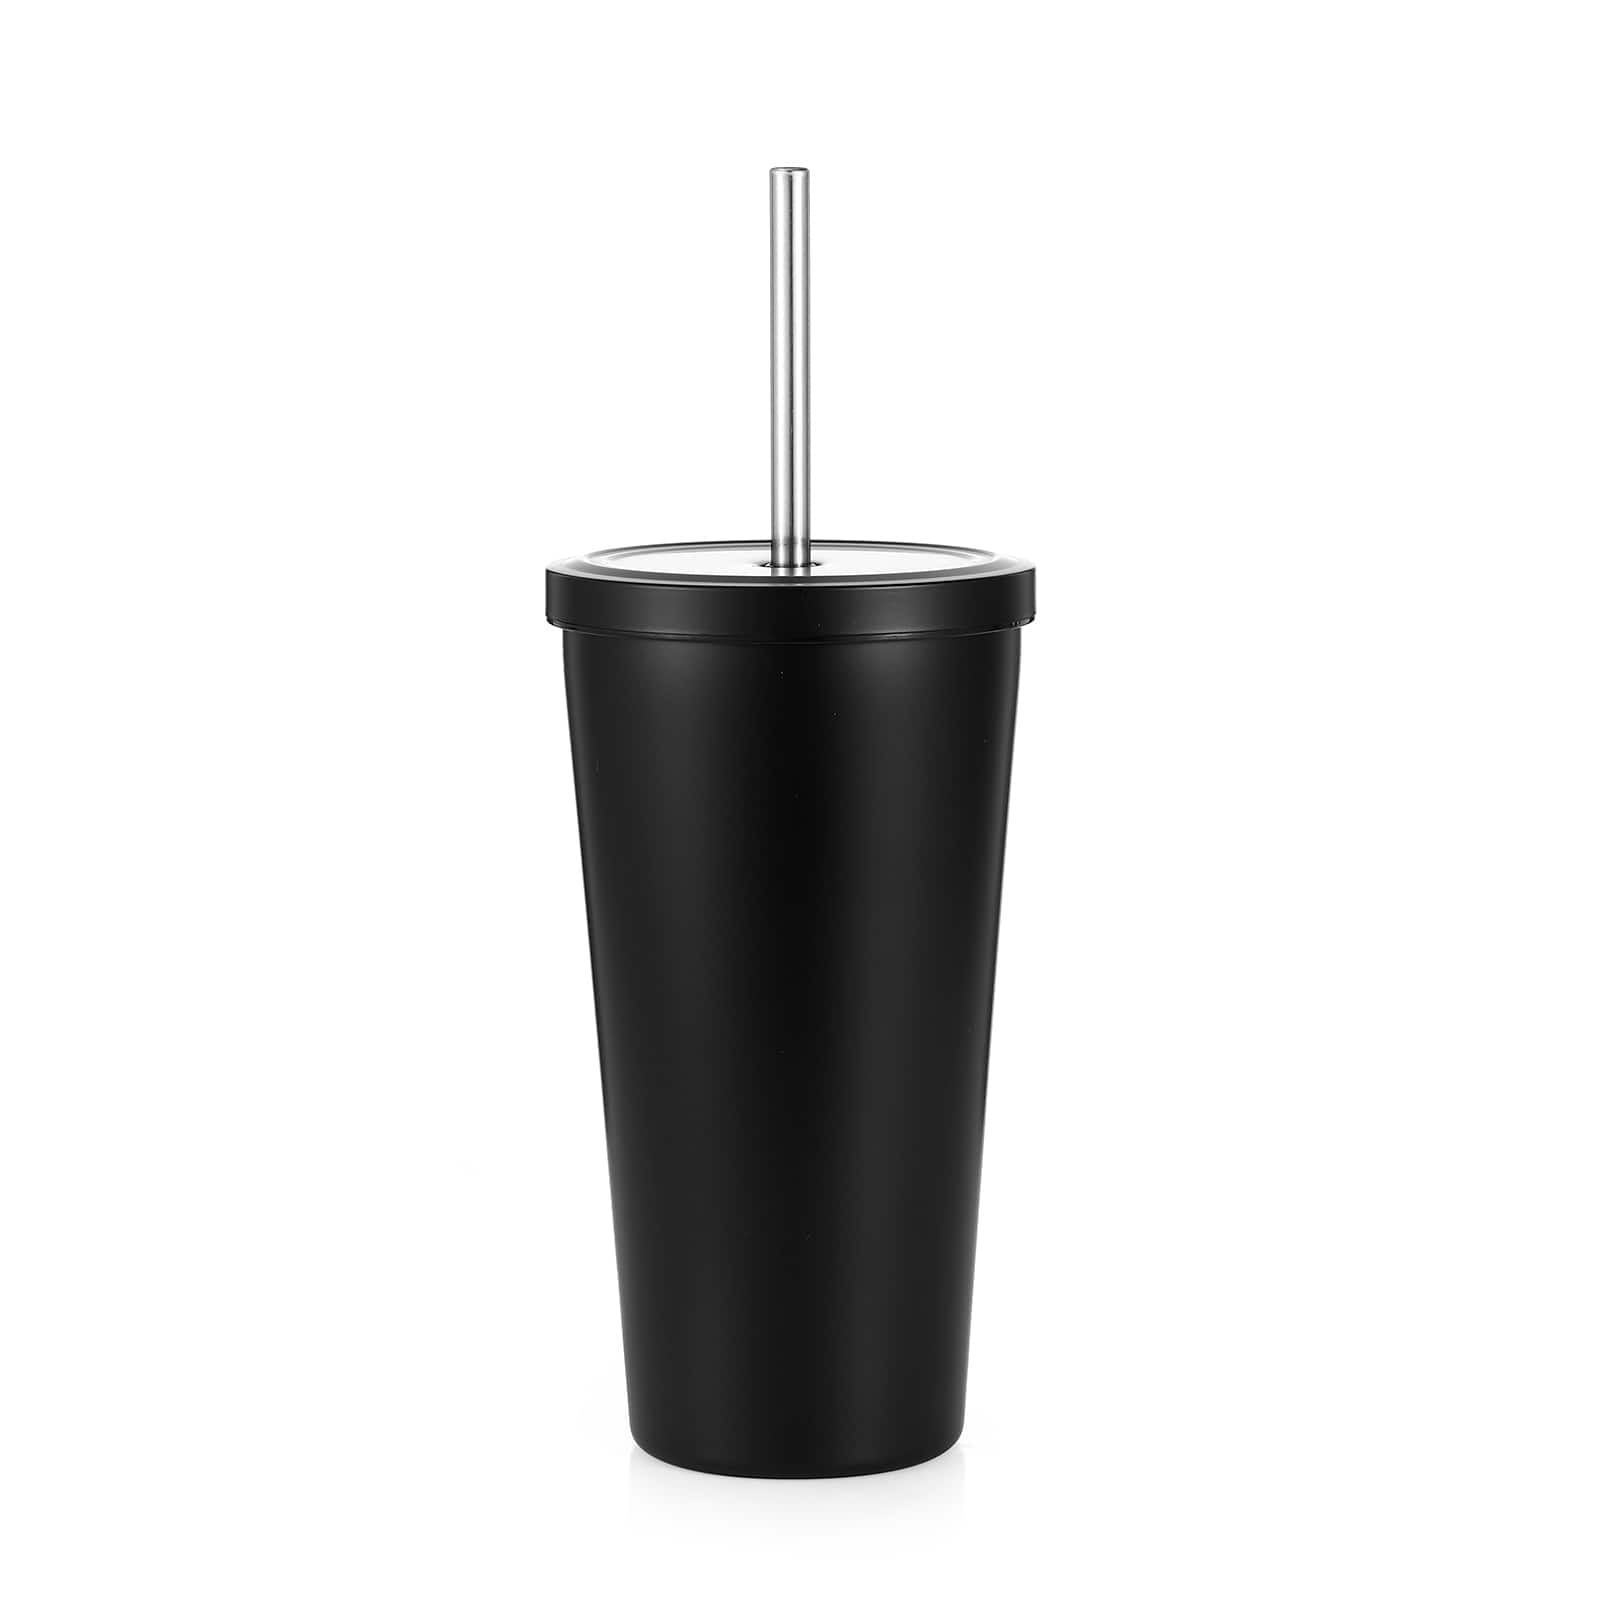 This Noir Edition Arctic Tumbler Keeps Drinks Cool For 24 Hours, Sipping  BBT Will Be Extra Shiok